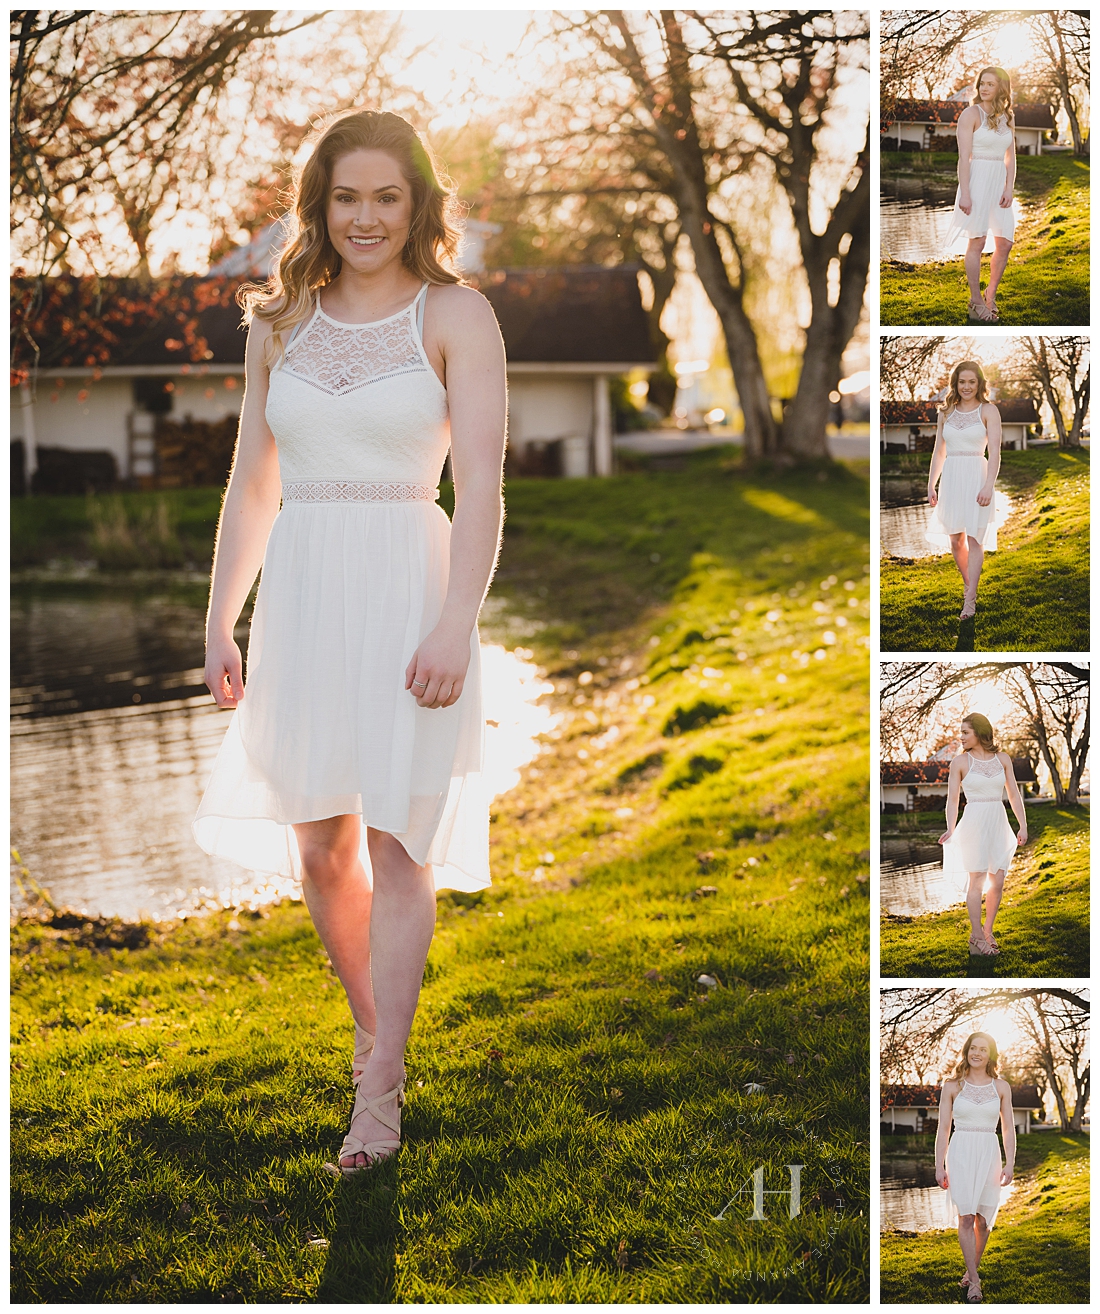 Spring Portraits in a Lace White Dress | Senior Portrait Inspiration | Photographed by the Best Tacoma Senior Portrait Photographer Amanda Howse Photography 